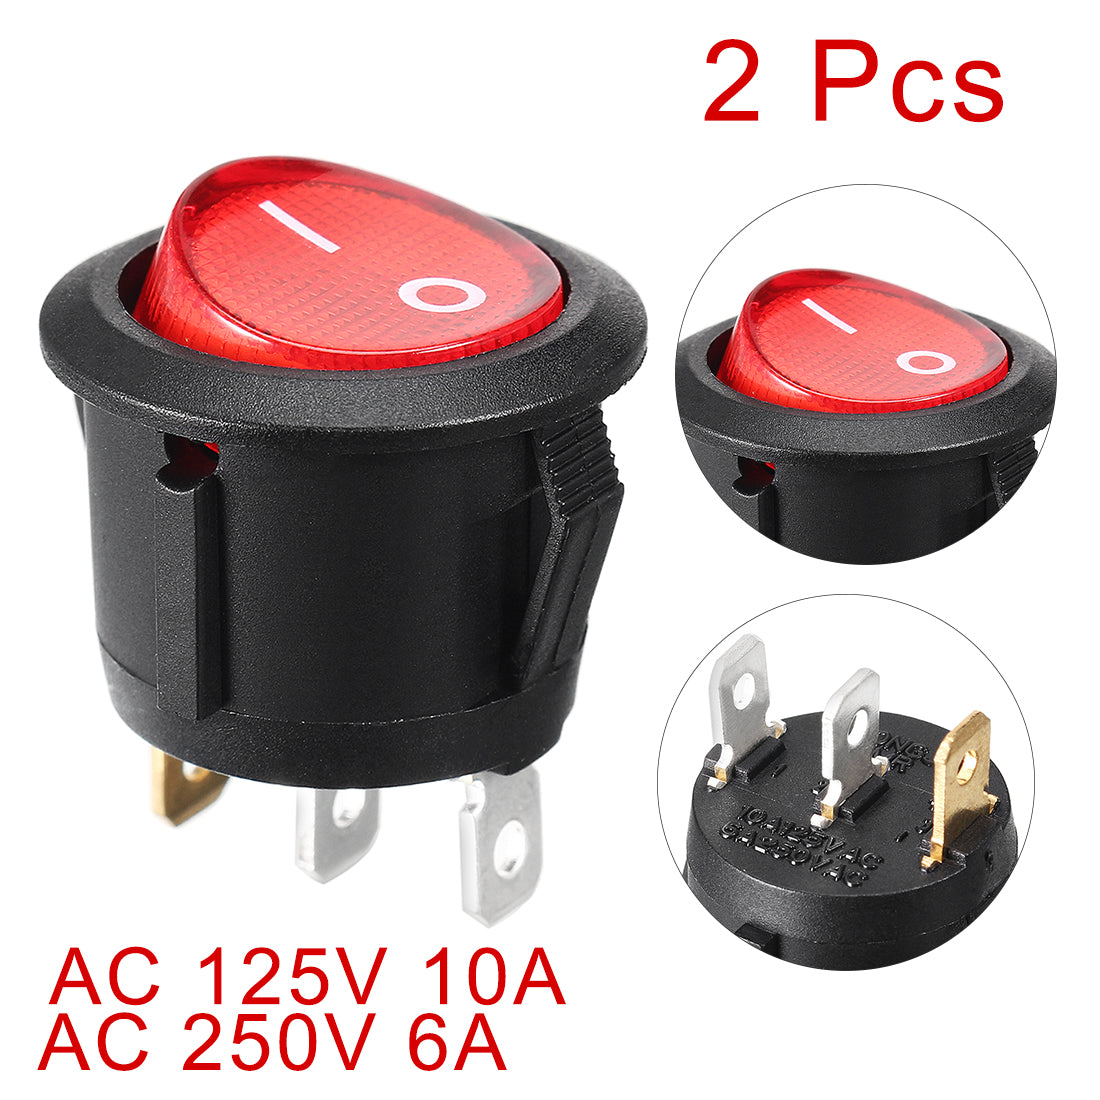 uxcell Uxcell 2 Pcs AC 6A 250V 10A 125V Red Light SPST ON/OFF Snap in Rocker Switch